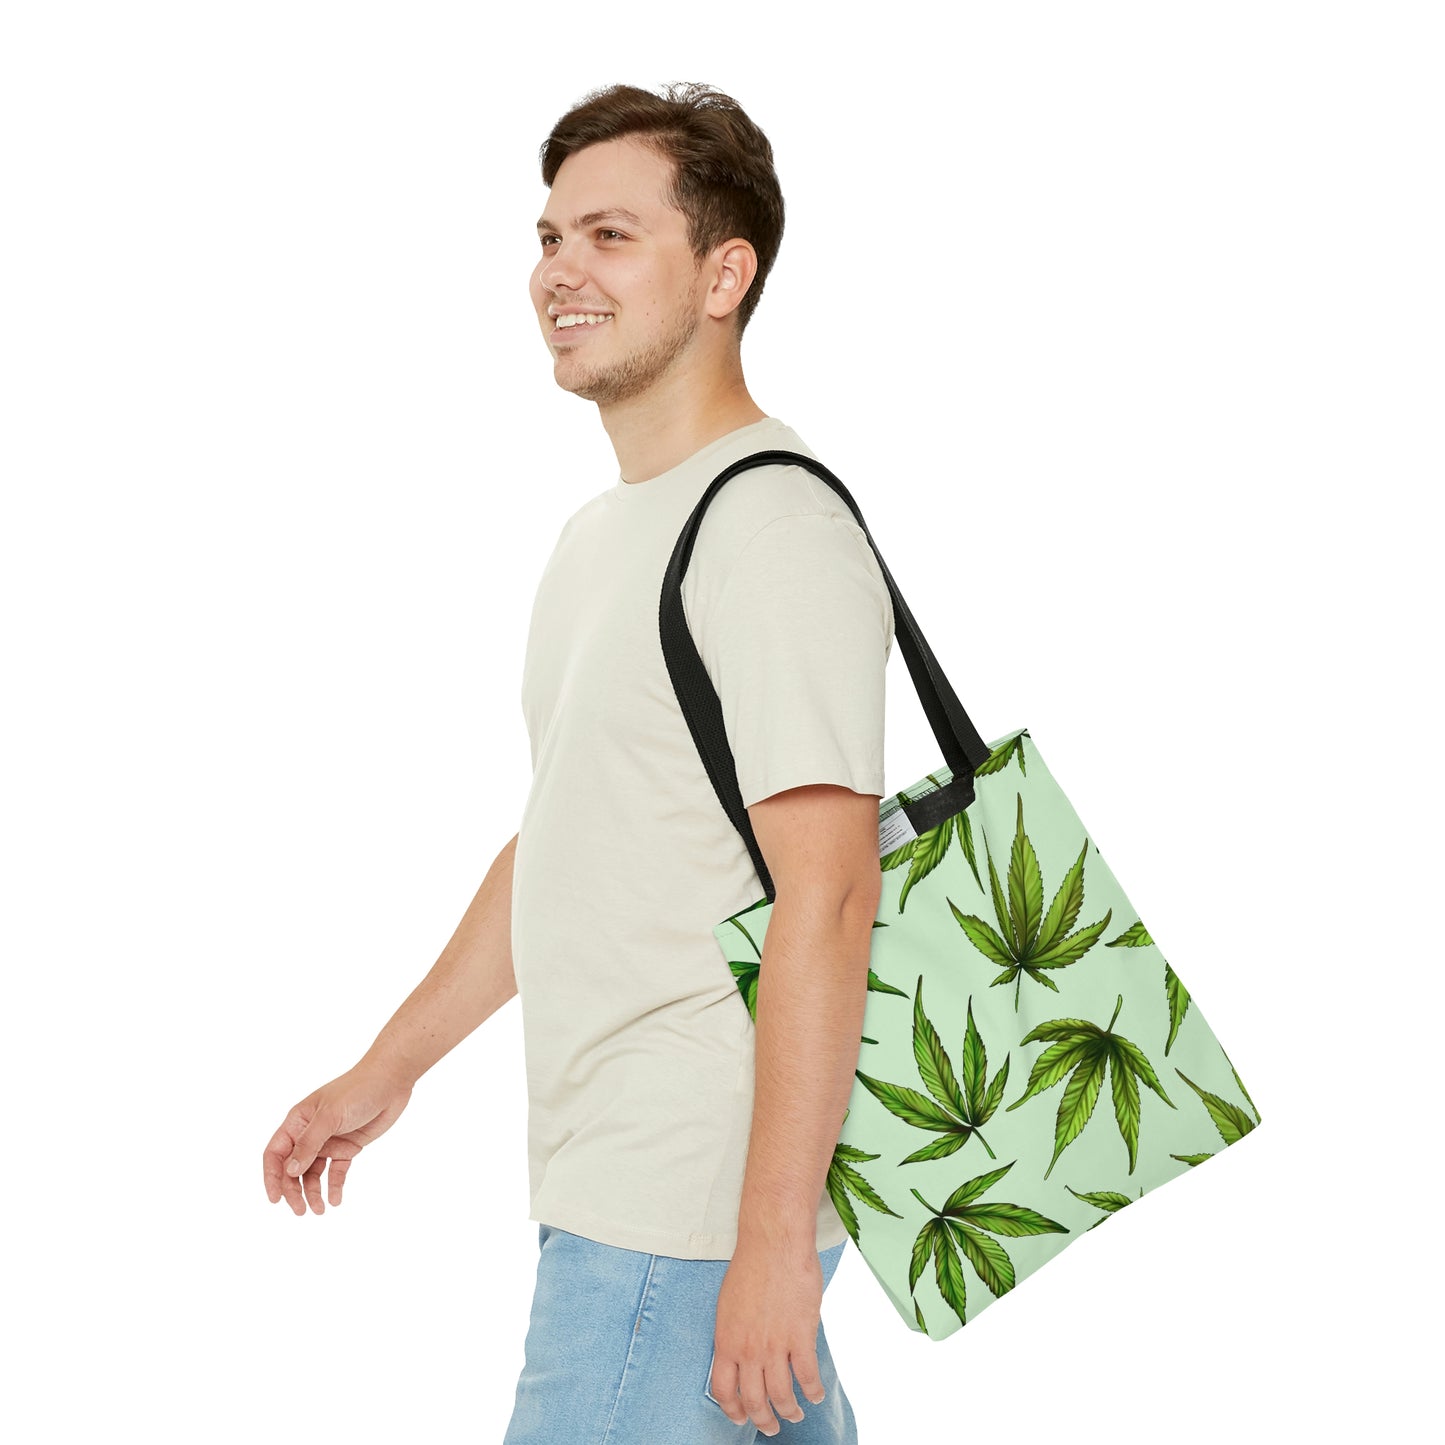 A man walks with a steady pace while he pleasantly wears the Marijuana Leaves Green Tote Bag